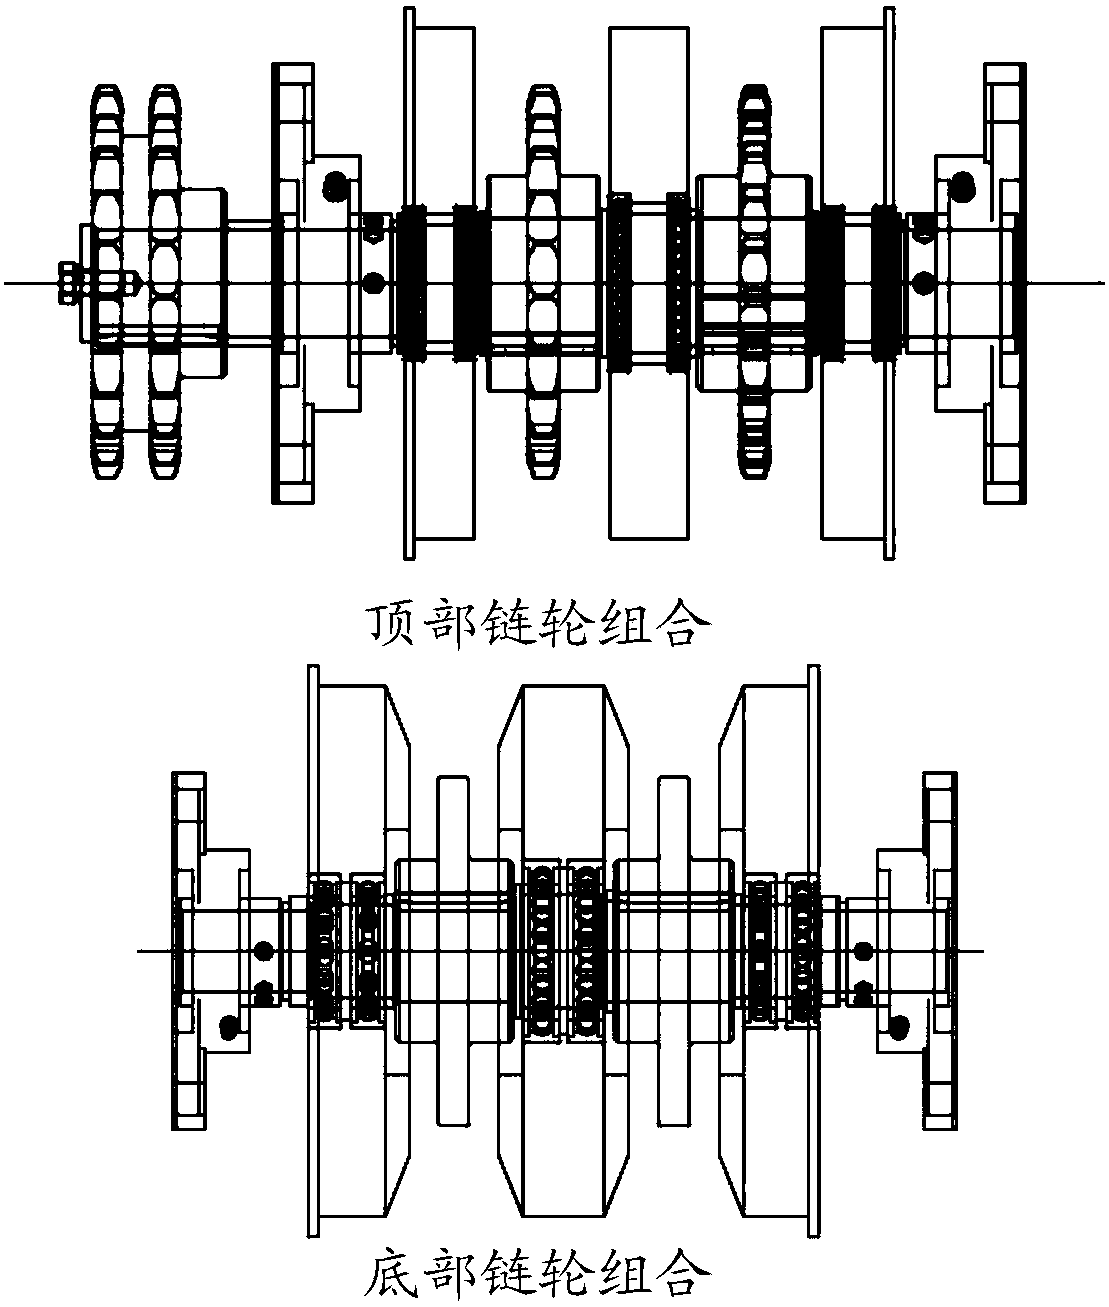 Friction-driven perpendicular immersion type process conveying equipment